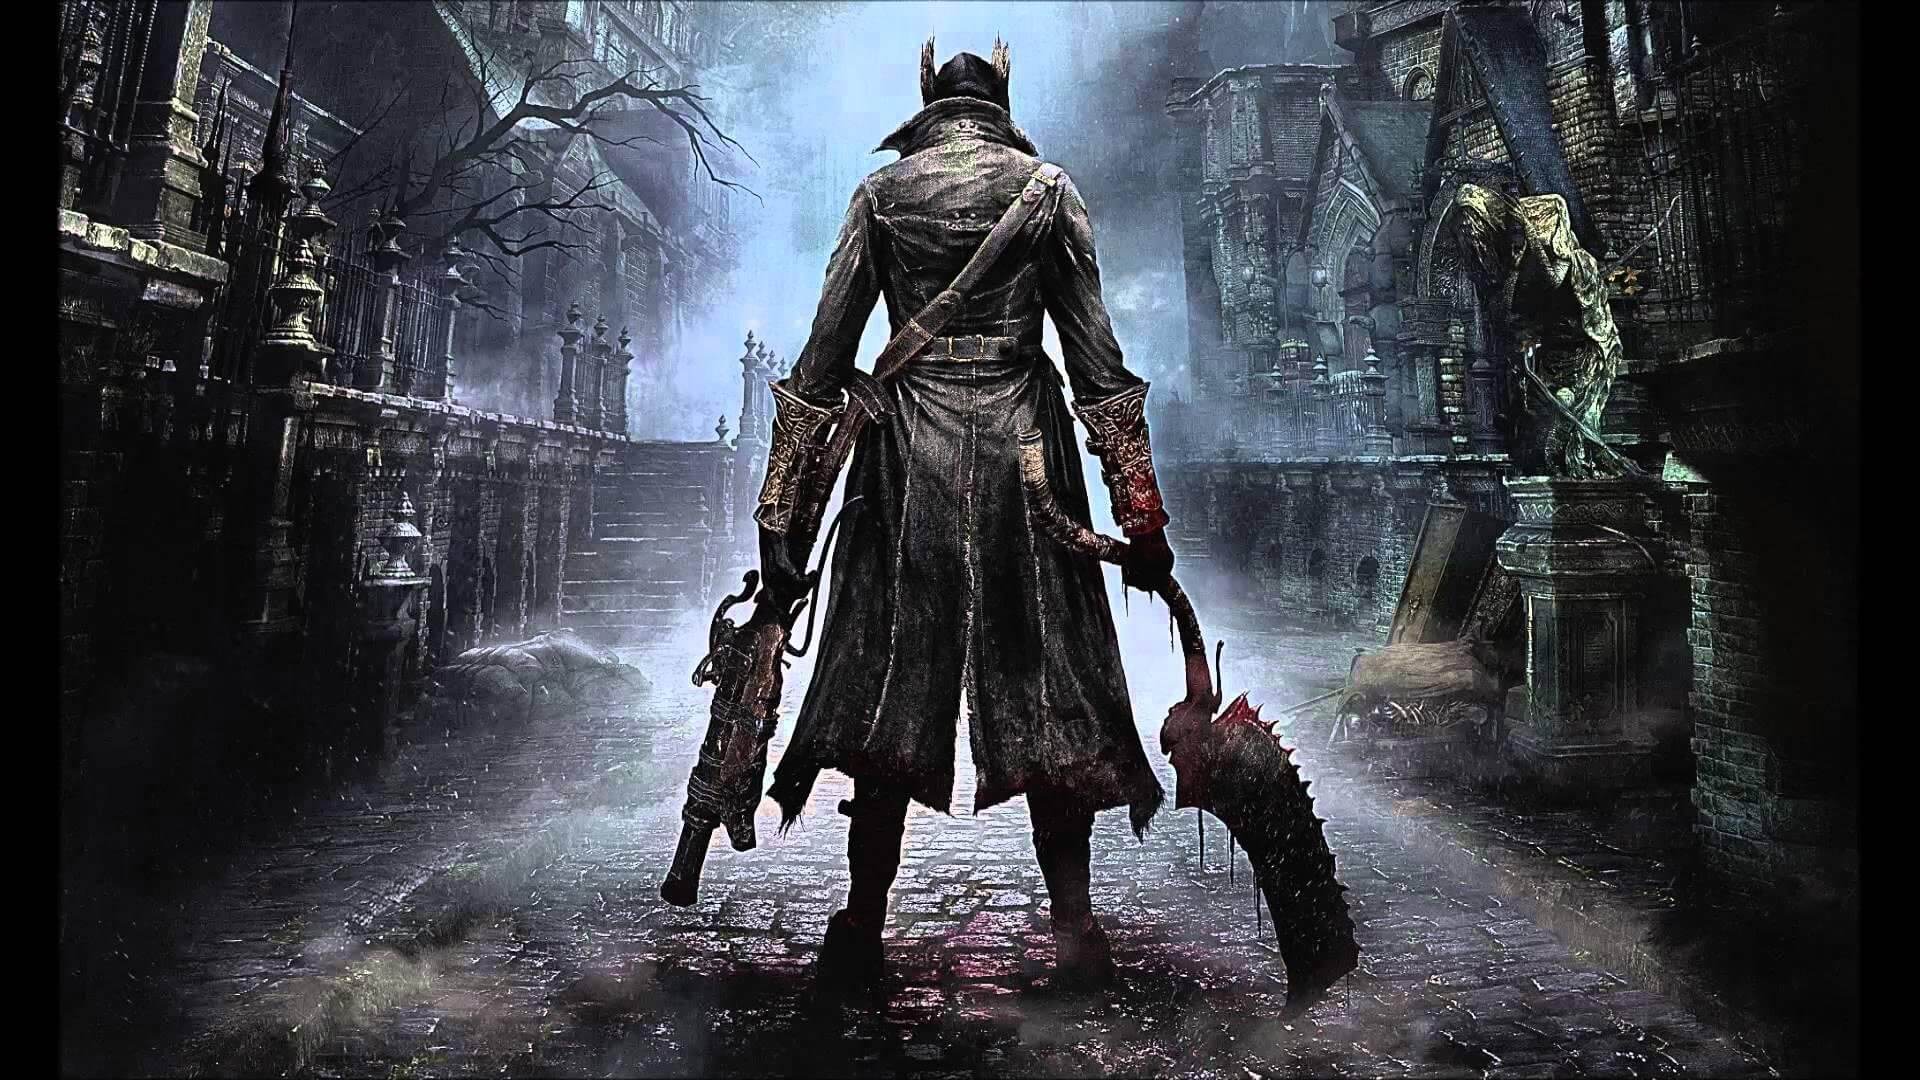 Bloodborne had a fully playable PC version, intended for internal purporses